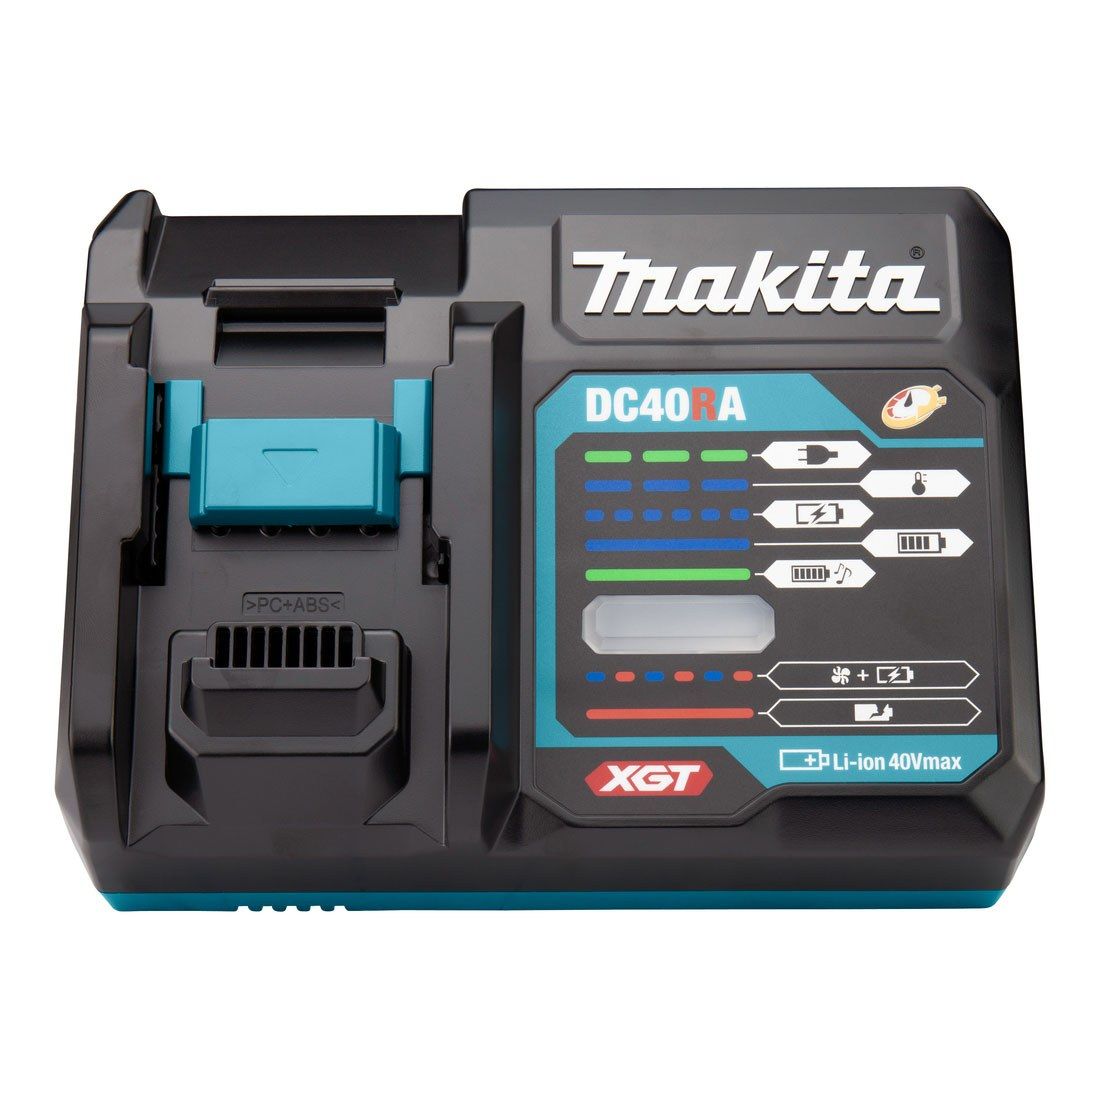 Makita 191K01-6 40Vmax XGT Power Source Kit 240V With 2 x 4.0Ah BL4040 Batteries, Charger & Case